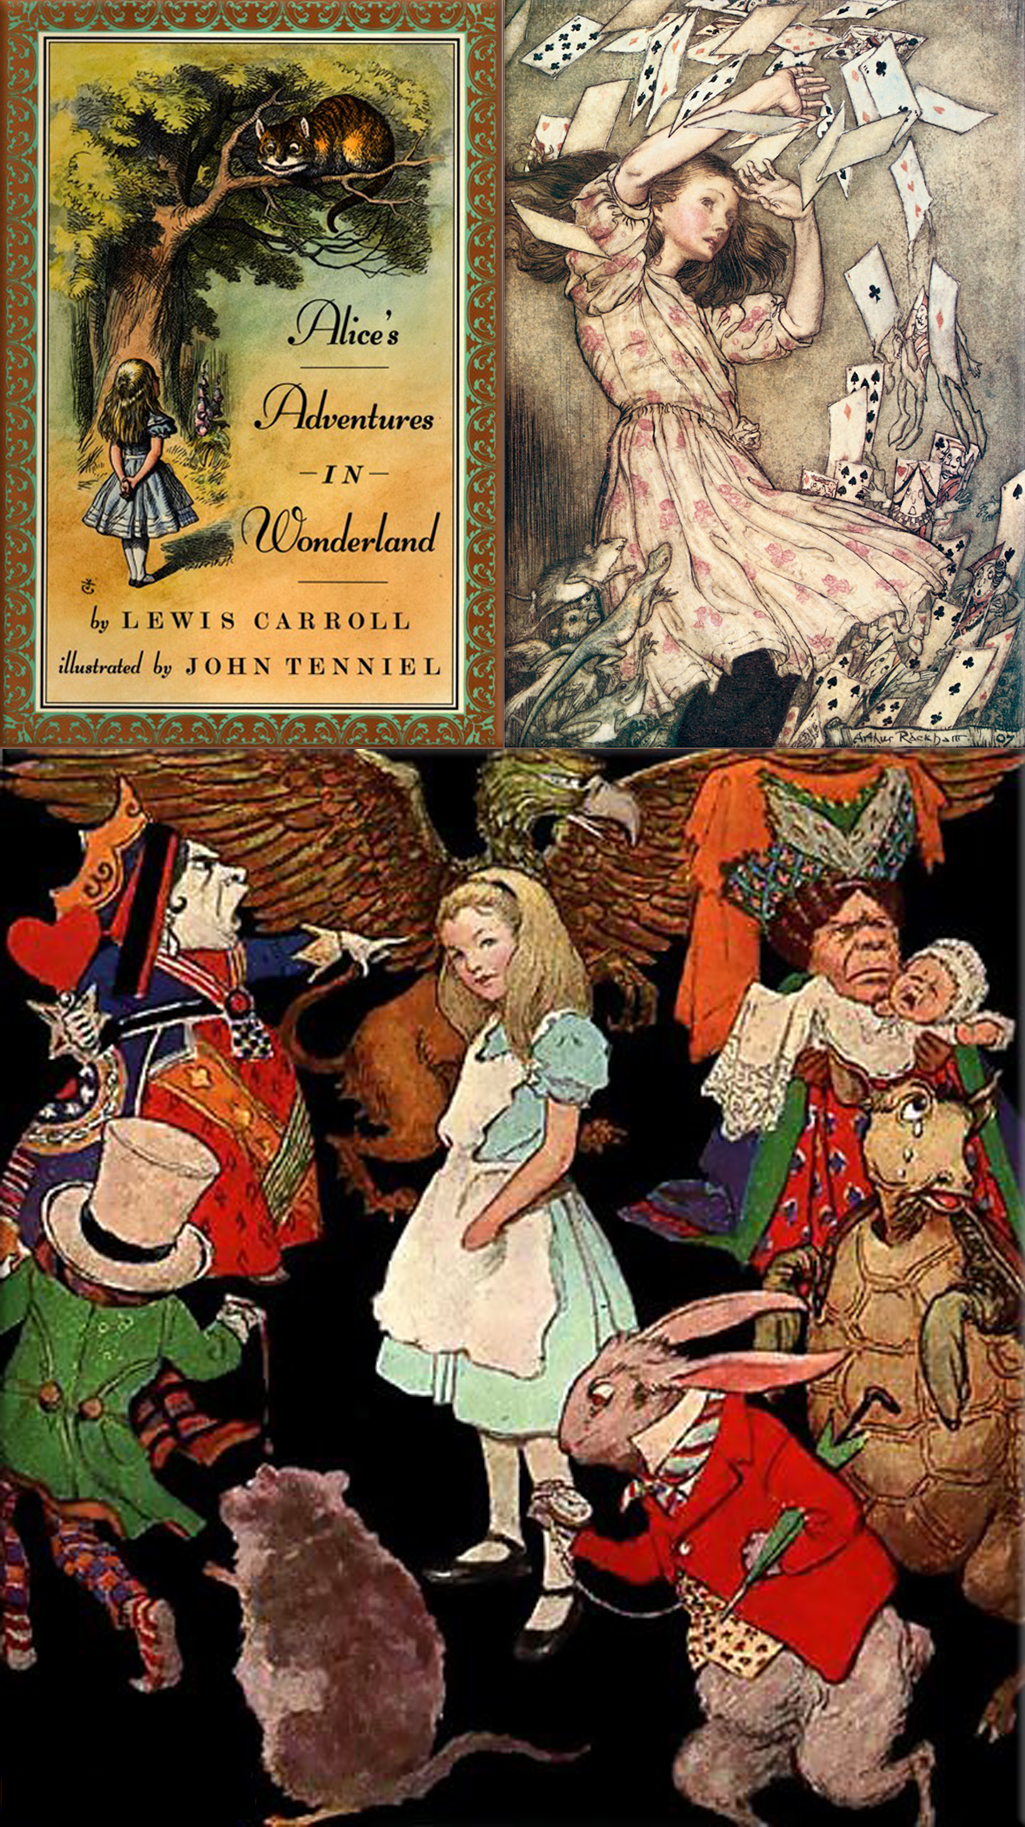 Lewis Carroll tells Alice Liddell a story that would grow into Alice's Adventures in Wonderland and its sequels